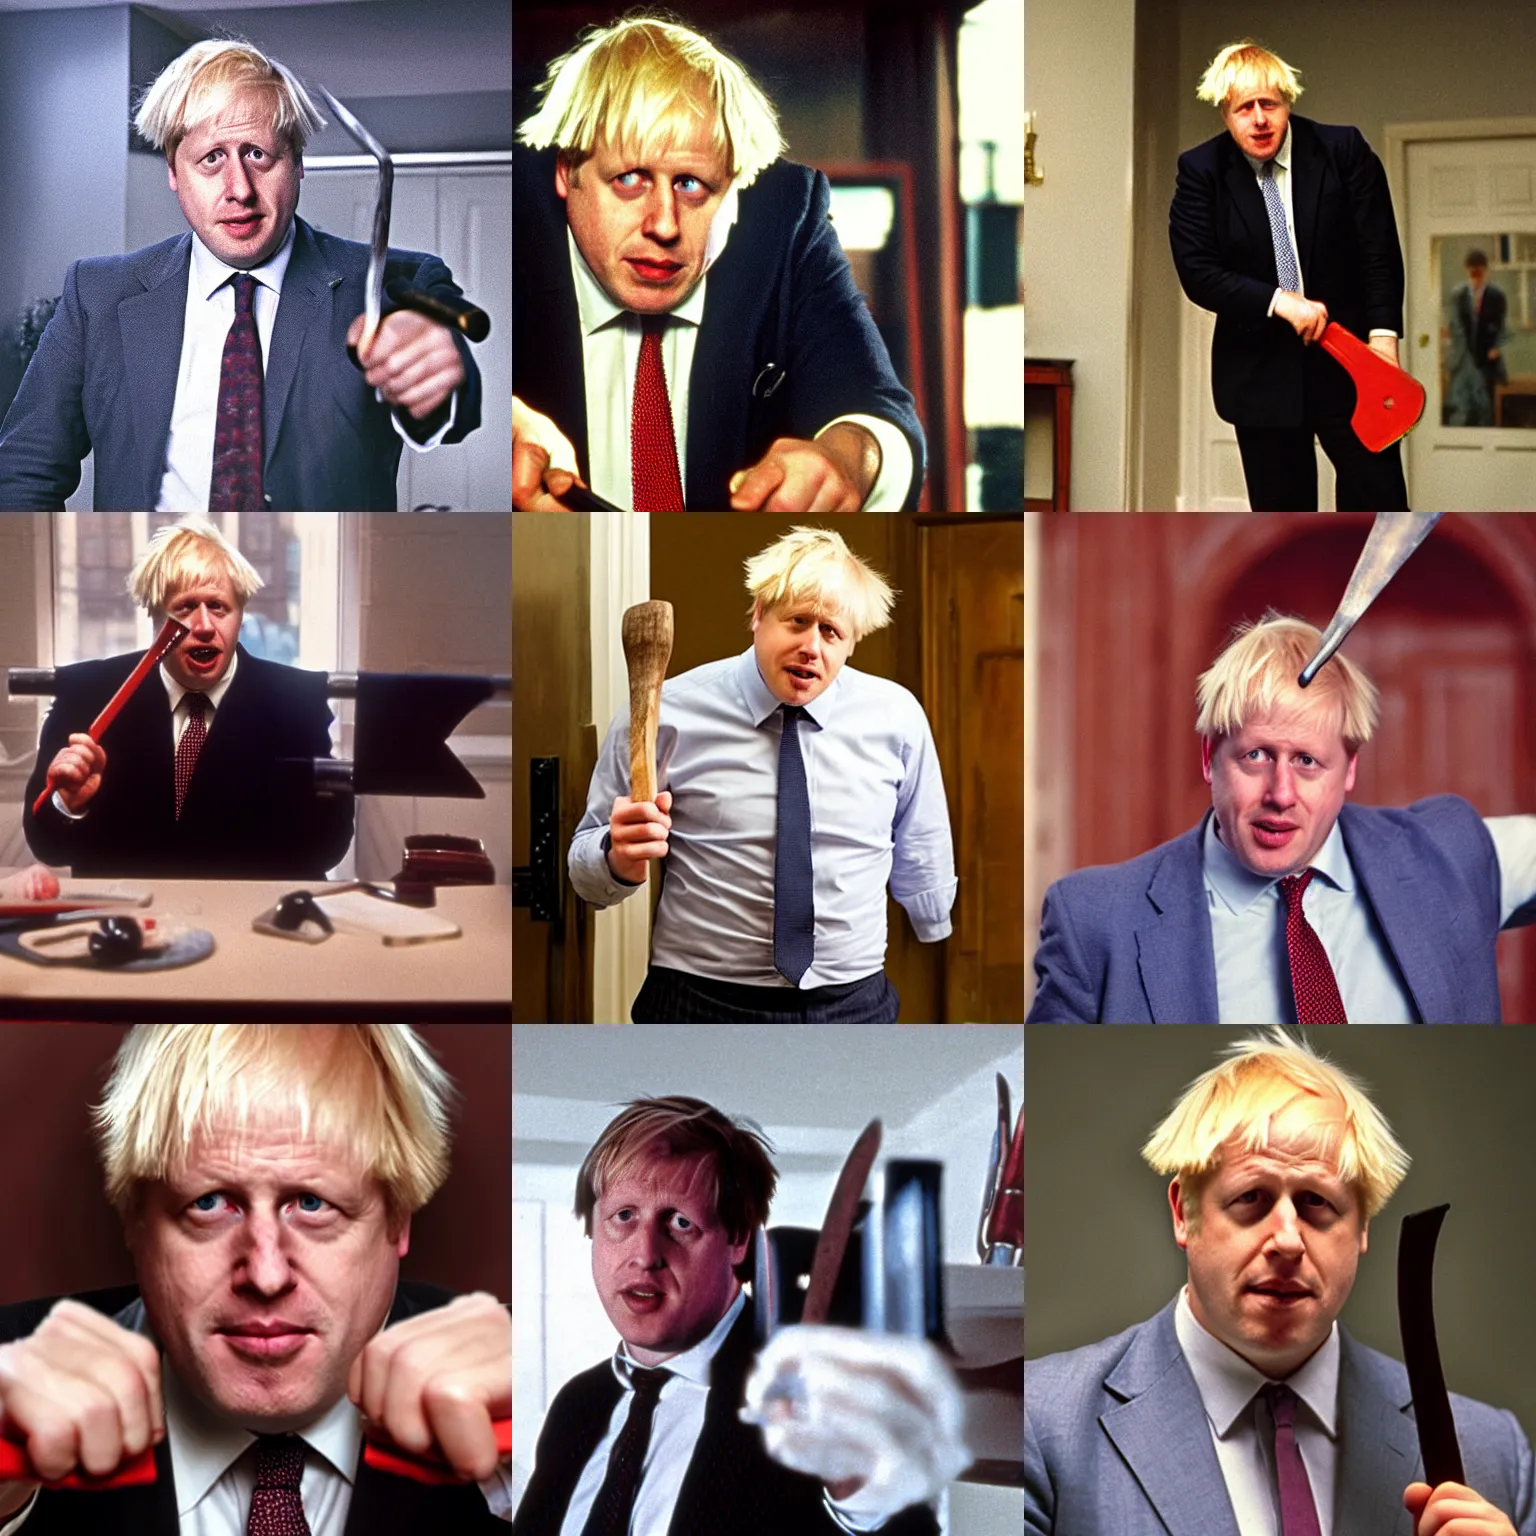 Prompt: boris johnson with axe in american psycho movie